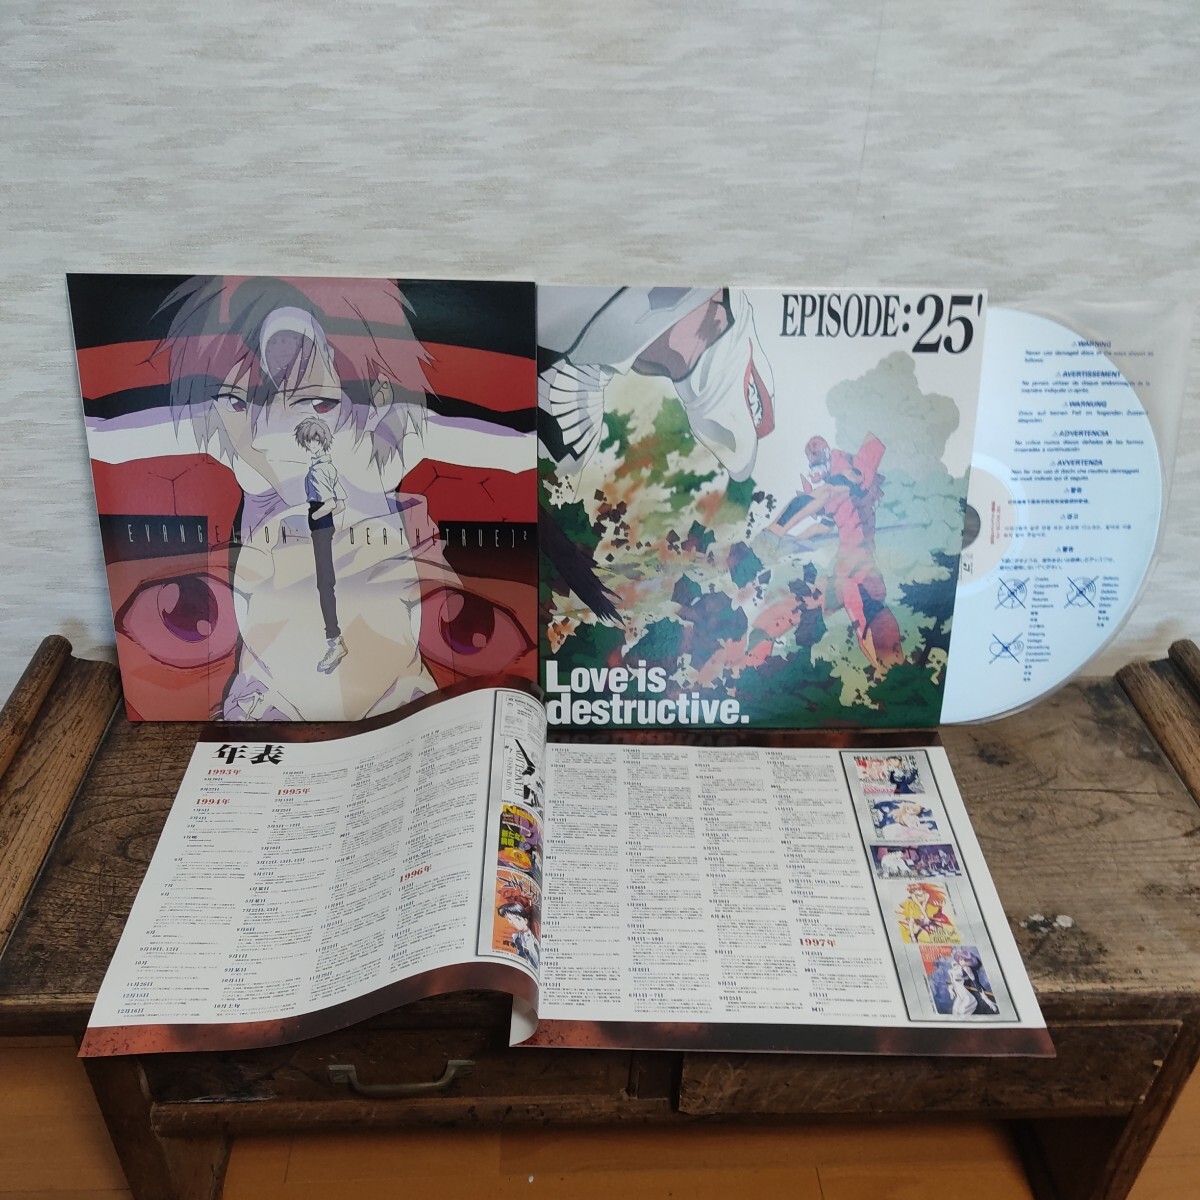  the first times limitation Neon Genesis Evangelion theater version BOX laser disk LD